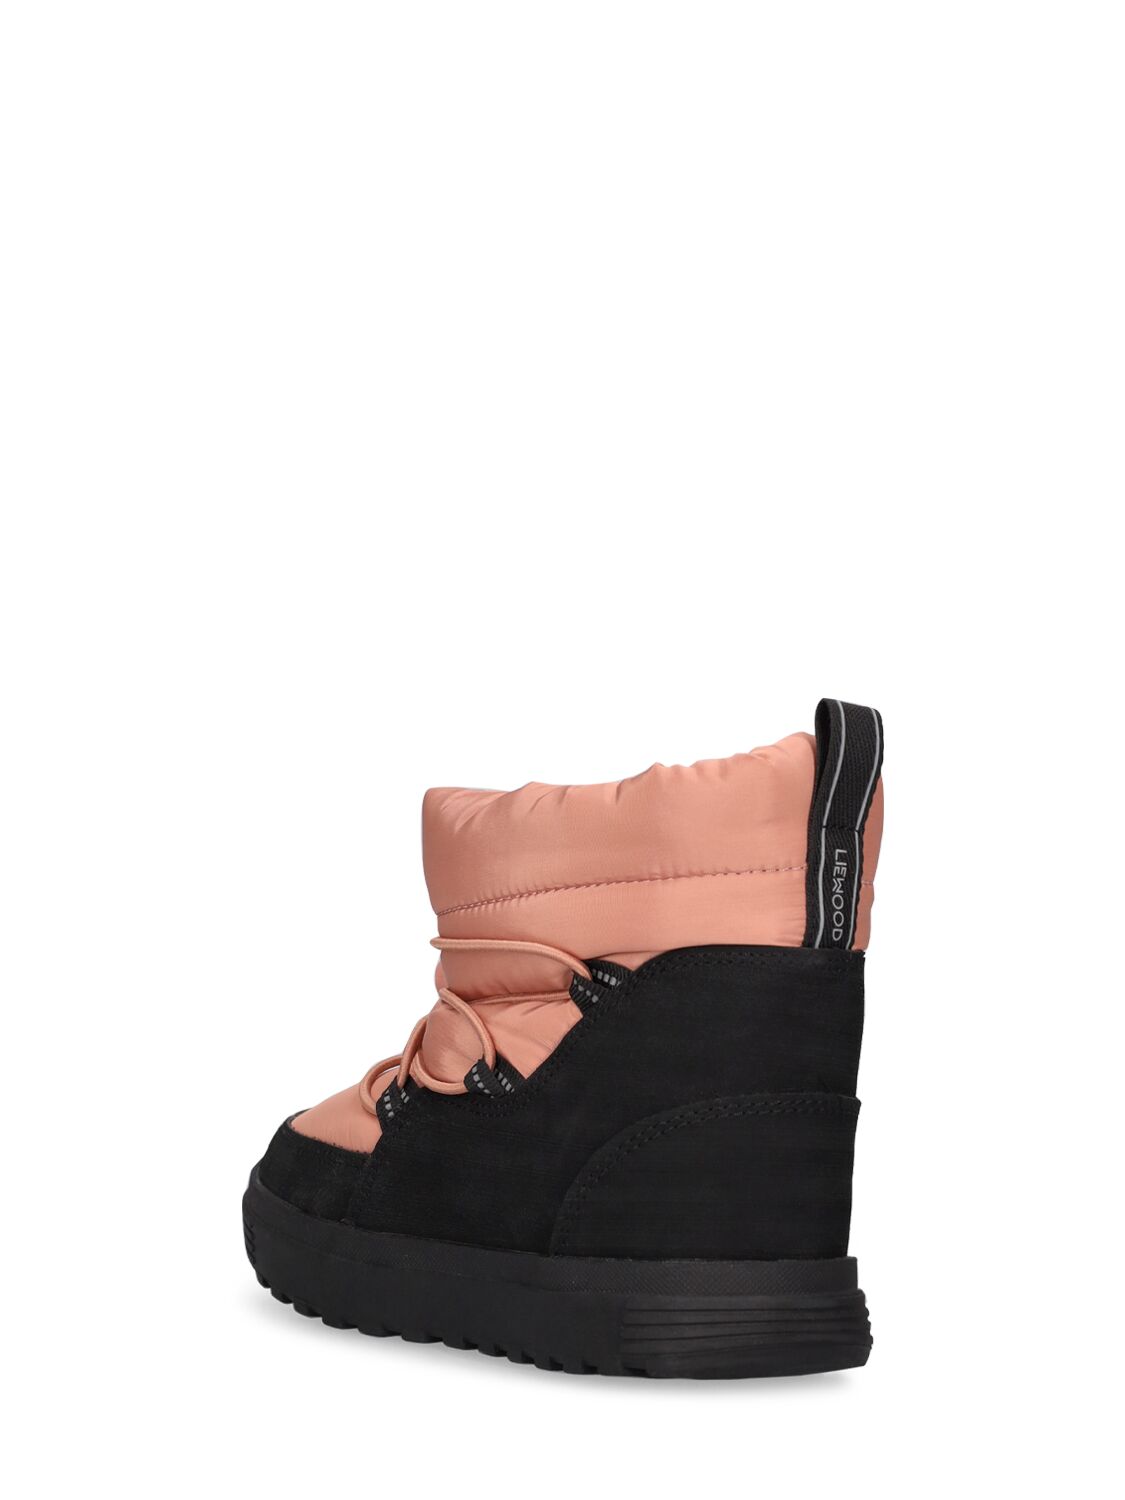 Shop Liewood Recycled Nylon Snow Boots In Pink,black